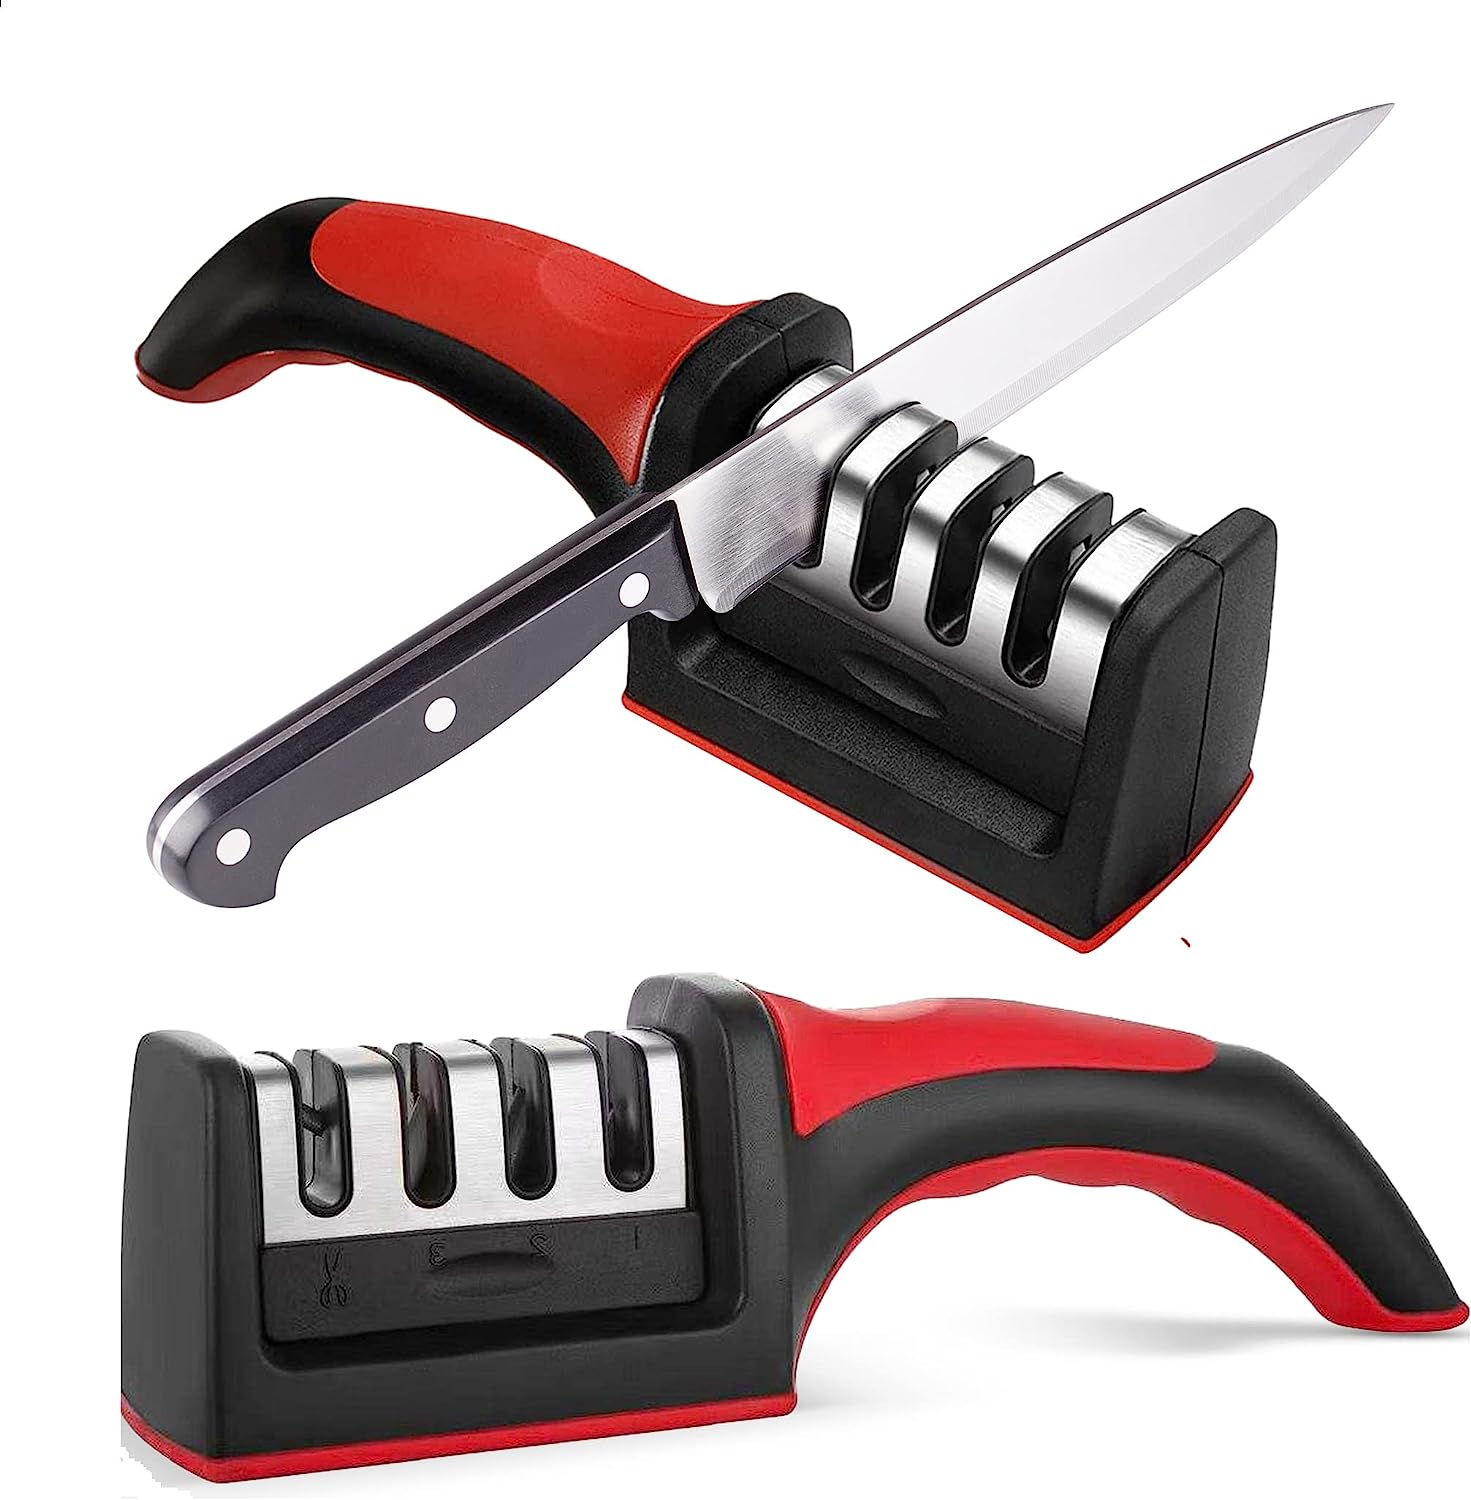 4-in-1 longzon [4 stage] Knife Sharpener with a Pair of Cut-Resistant  Glove, Original Premium Polish Blades, Best Kitchen Knife Sharpener Really  Works